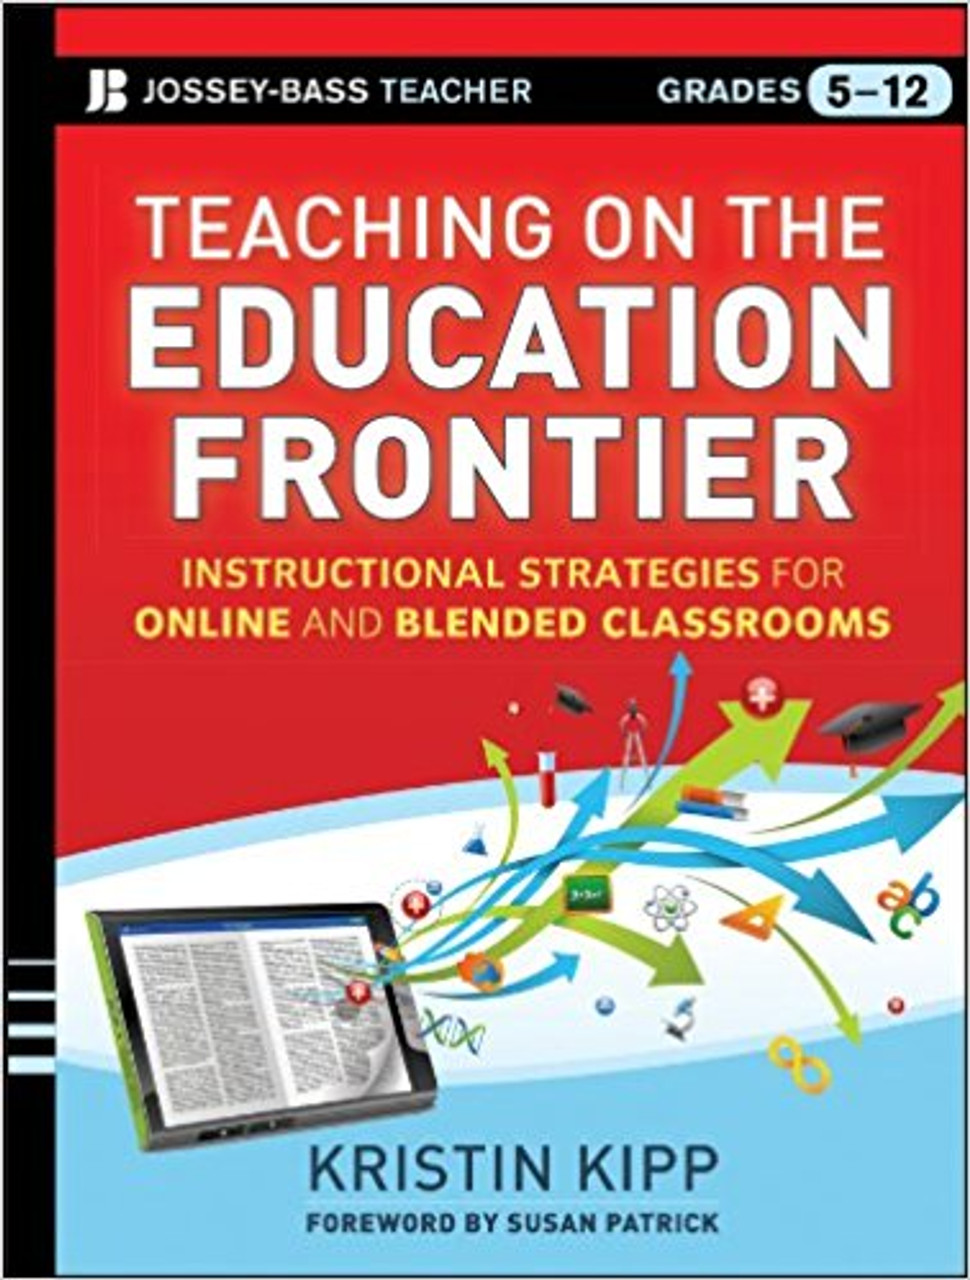 Teaching on the Education Frontier: Instructional Strategies for Online and Blended Classrooms, Grades 5-12 by Kristin Kipp